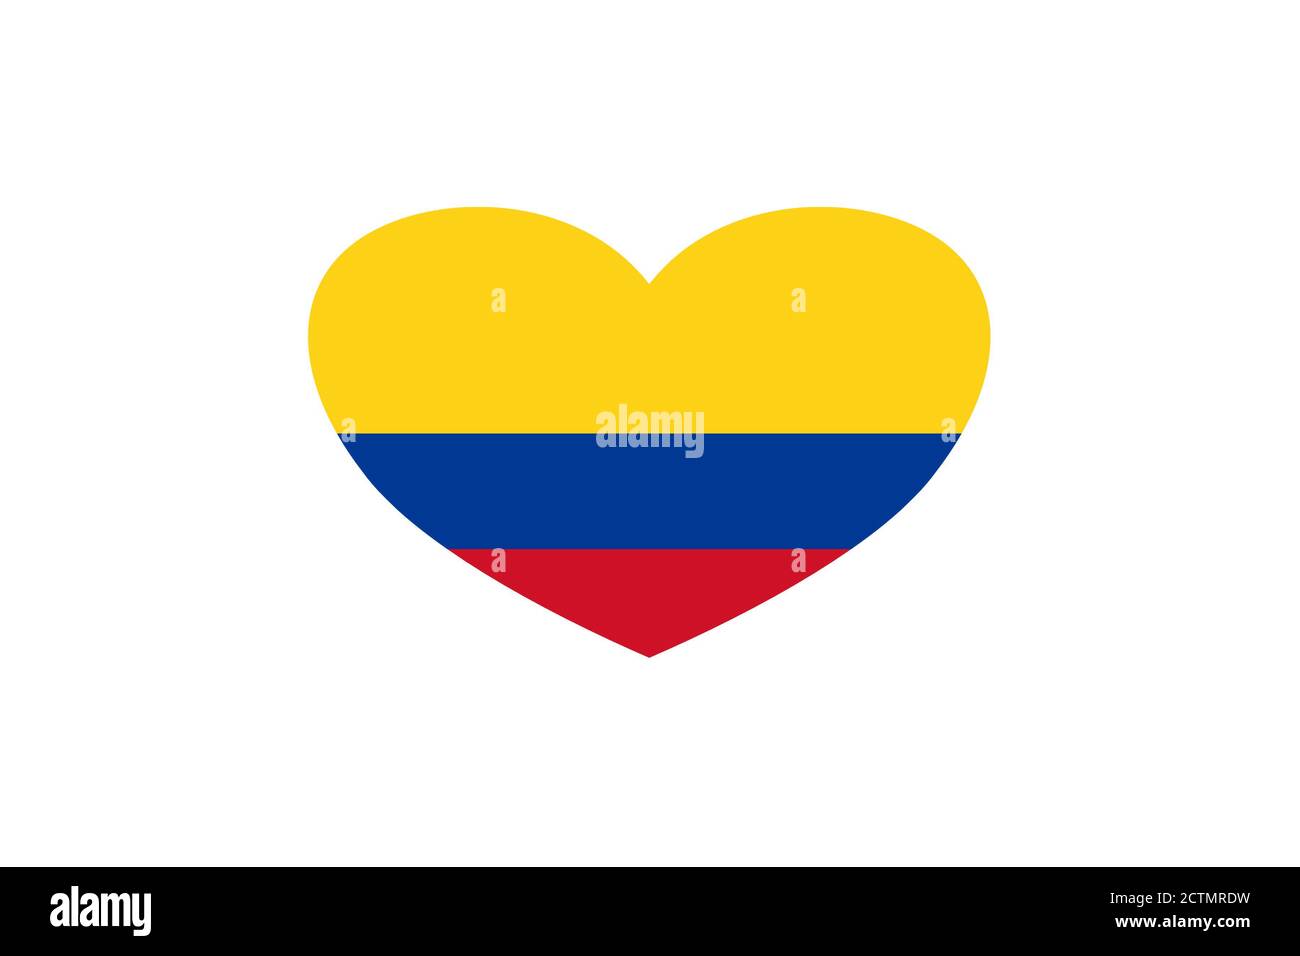 Colombia flag in the heart shape. Isolated on a white background. Stock Photo